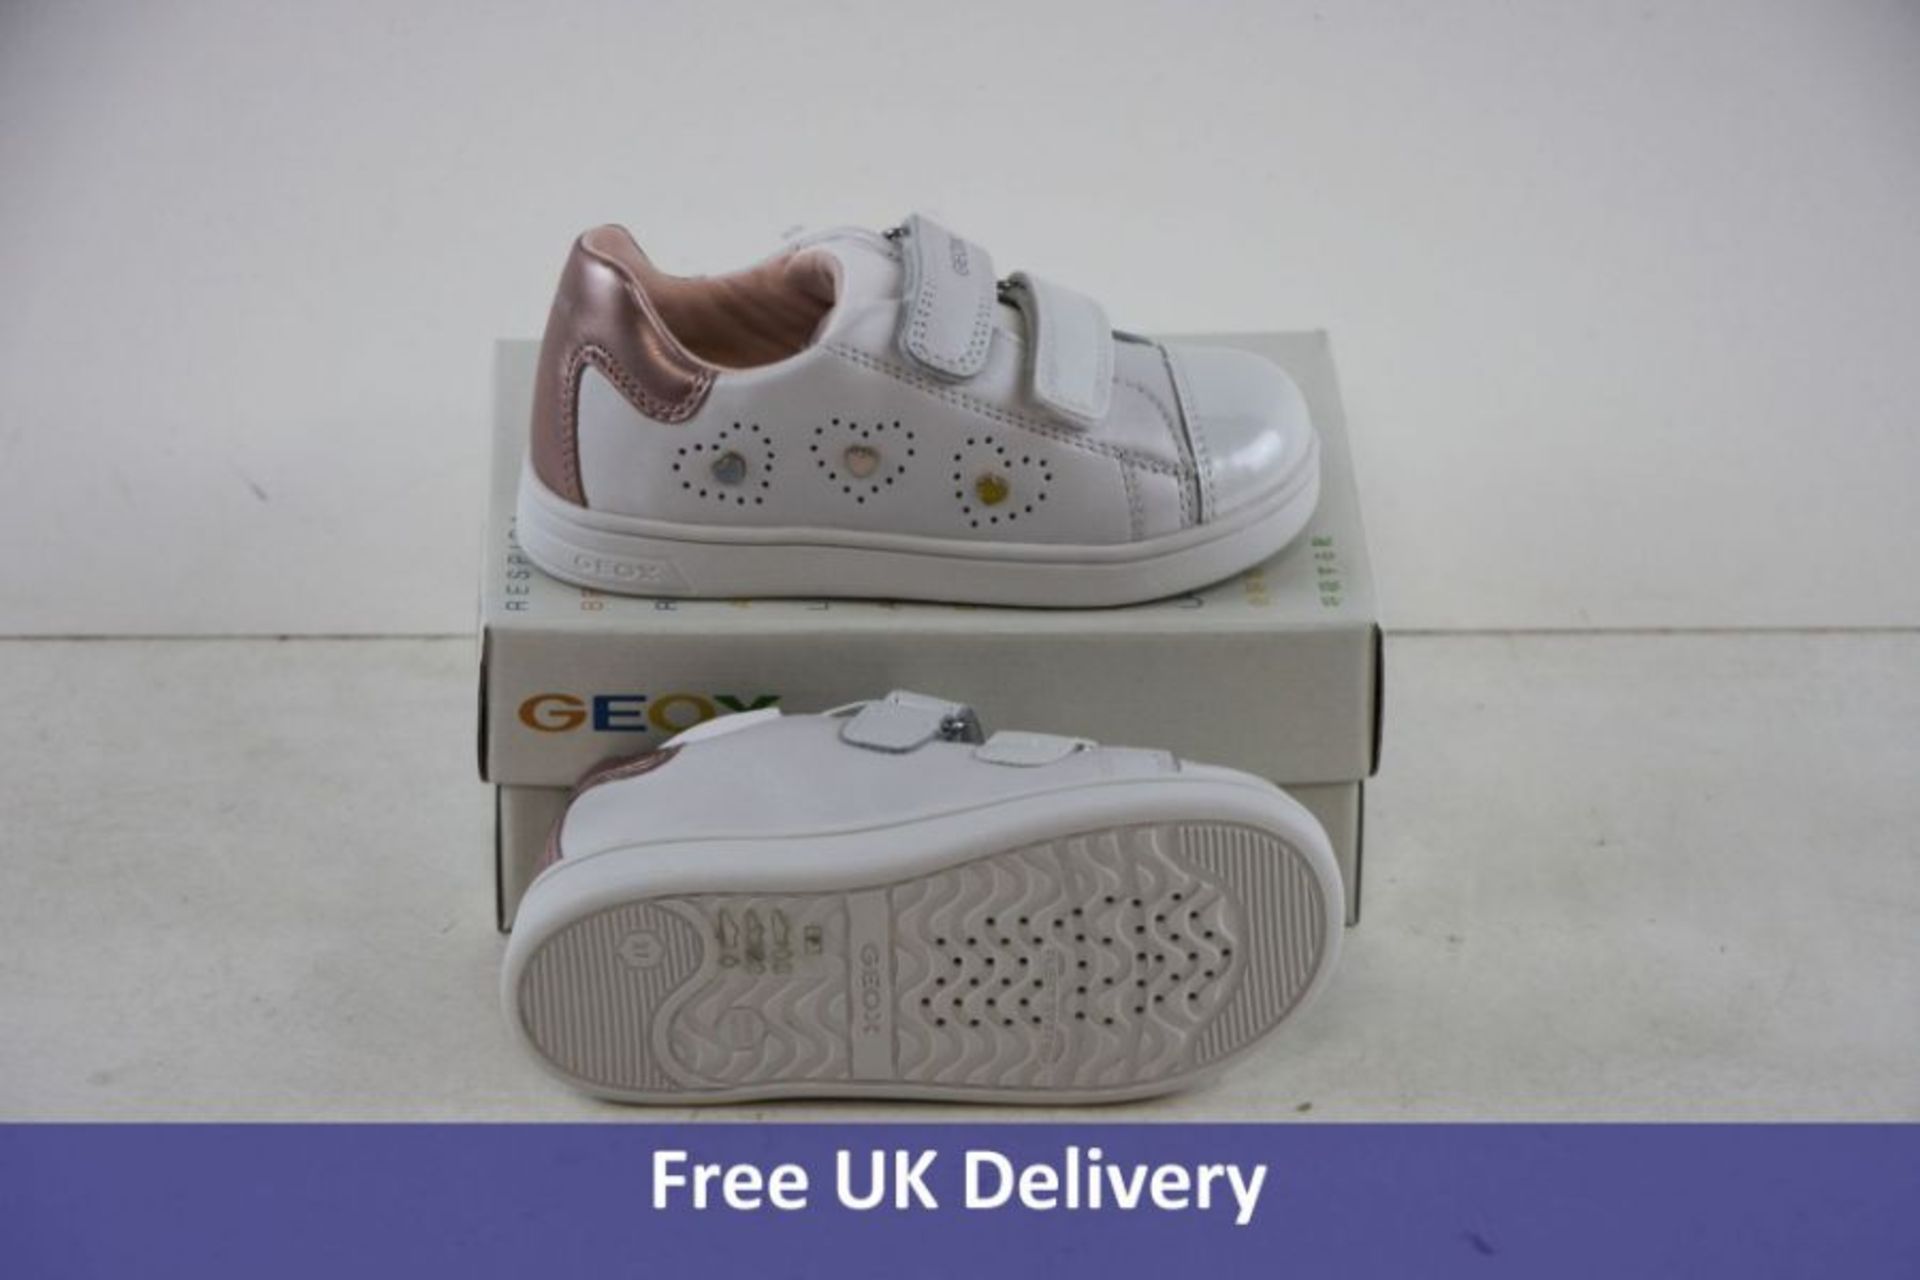 Geox Girls DJROCK Trainers, White and Light Pink, UK 9